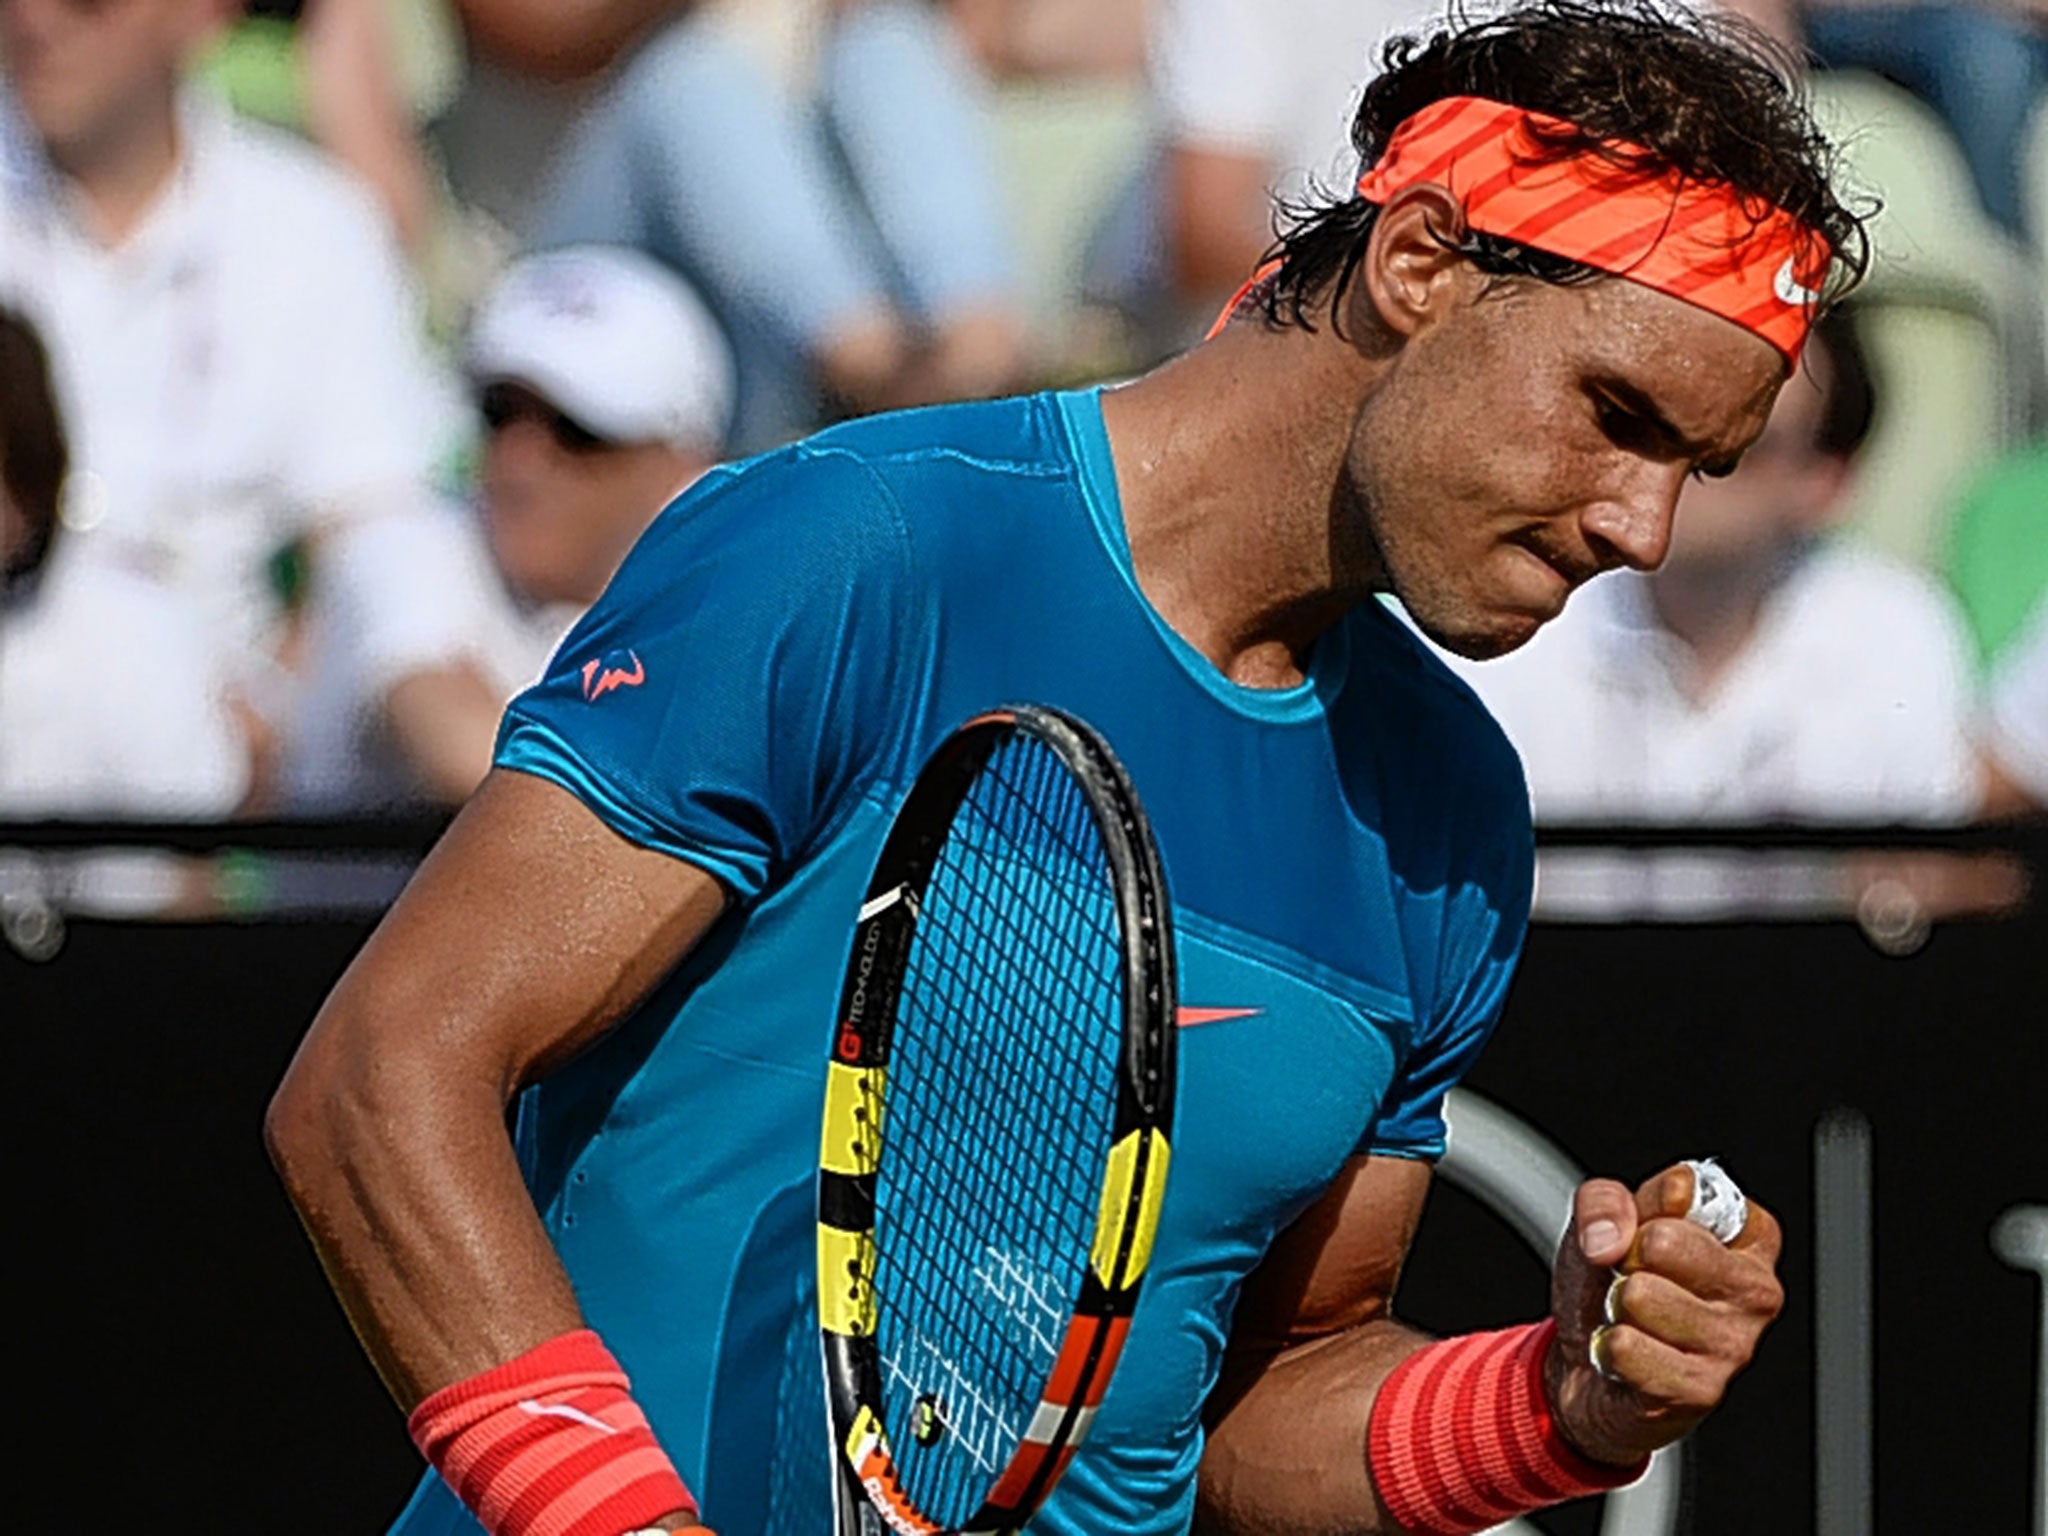 Rafael Nadal after winning a point on his way to victory against Marcos Baghdatis yesterday